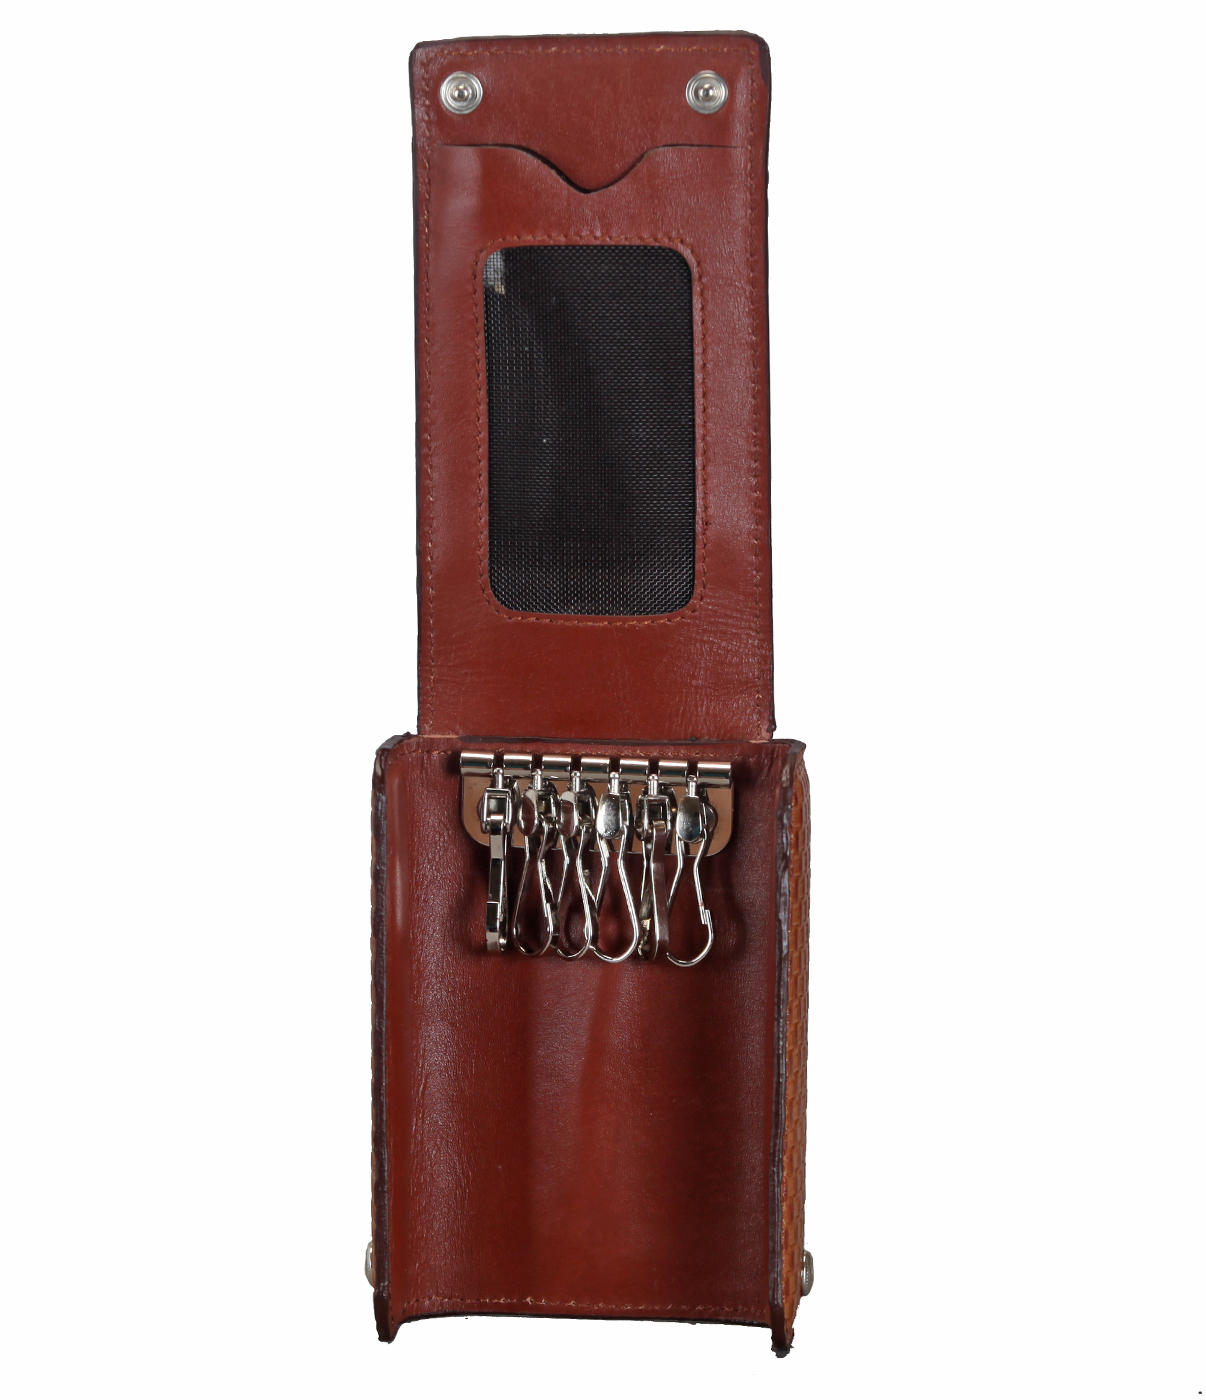 W260--Keyholder with space for electronic entry card in Genuine Leather - Tan